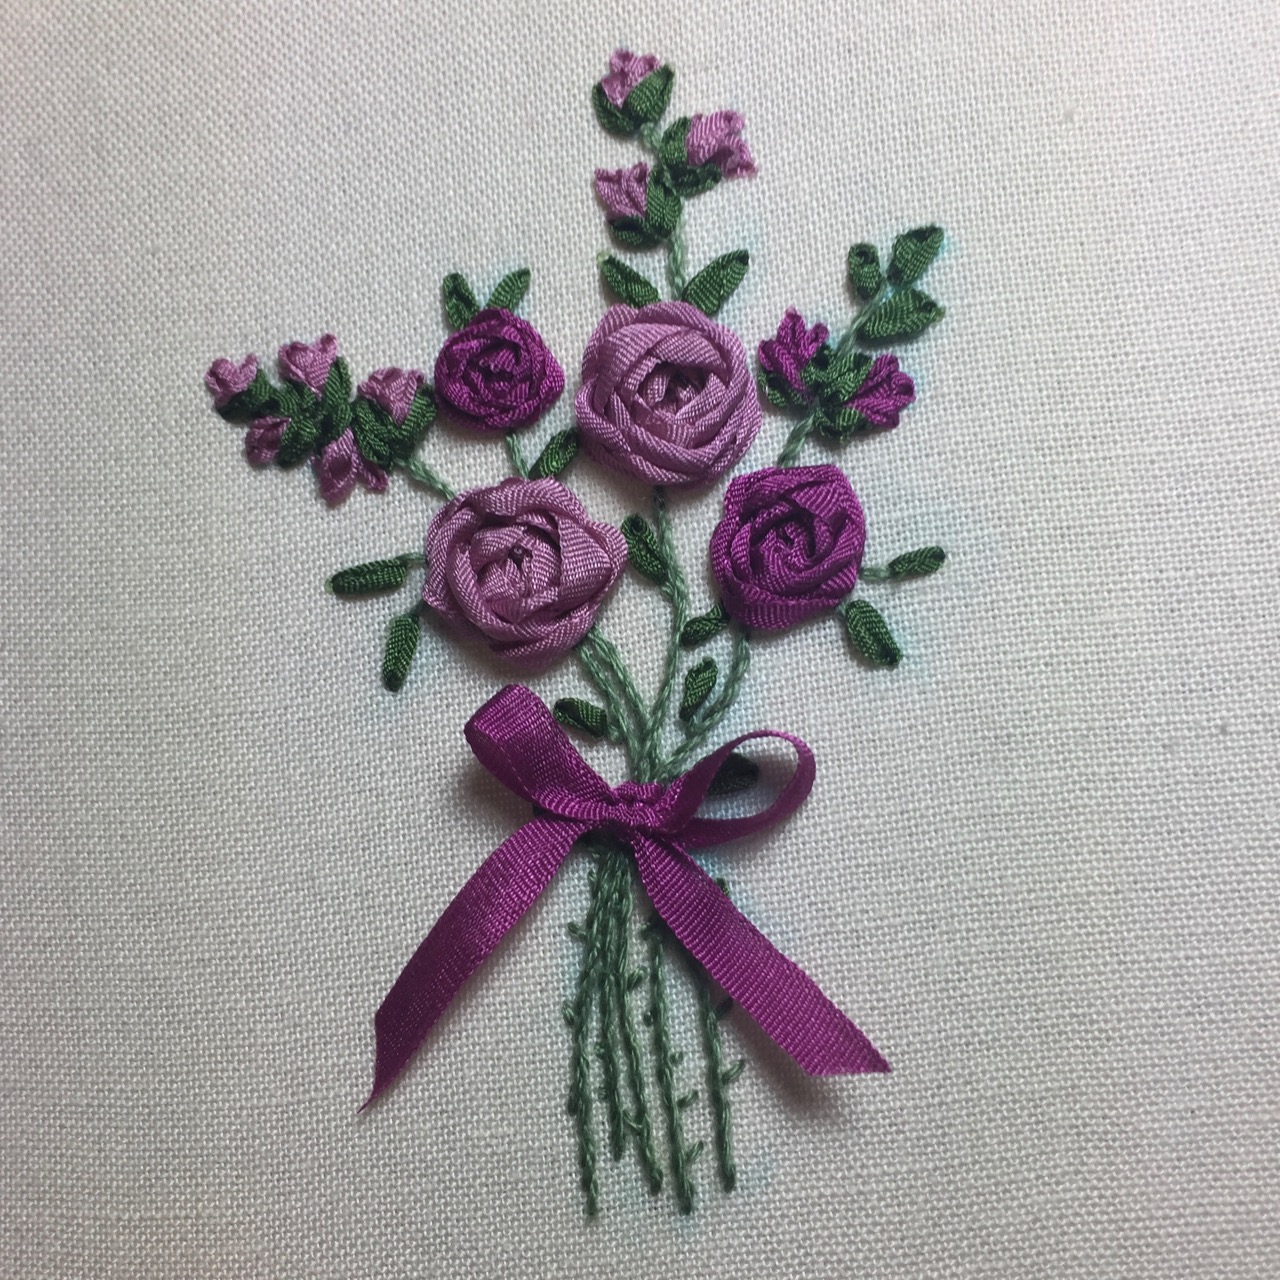 Silk Ribbon Embroidery – a first attempt – The Stitching sheep